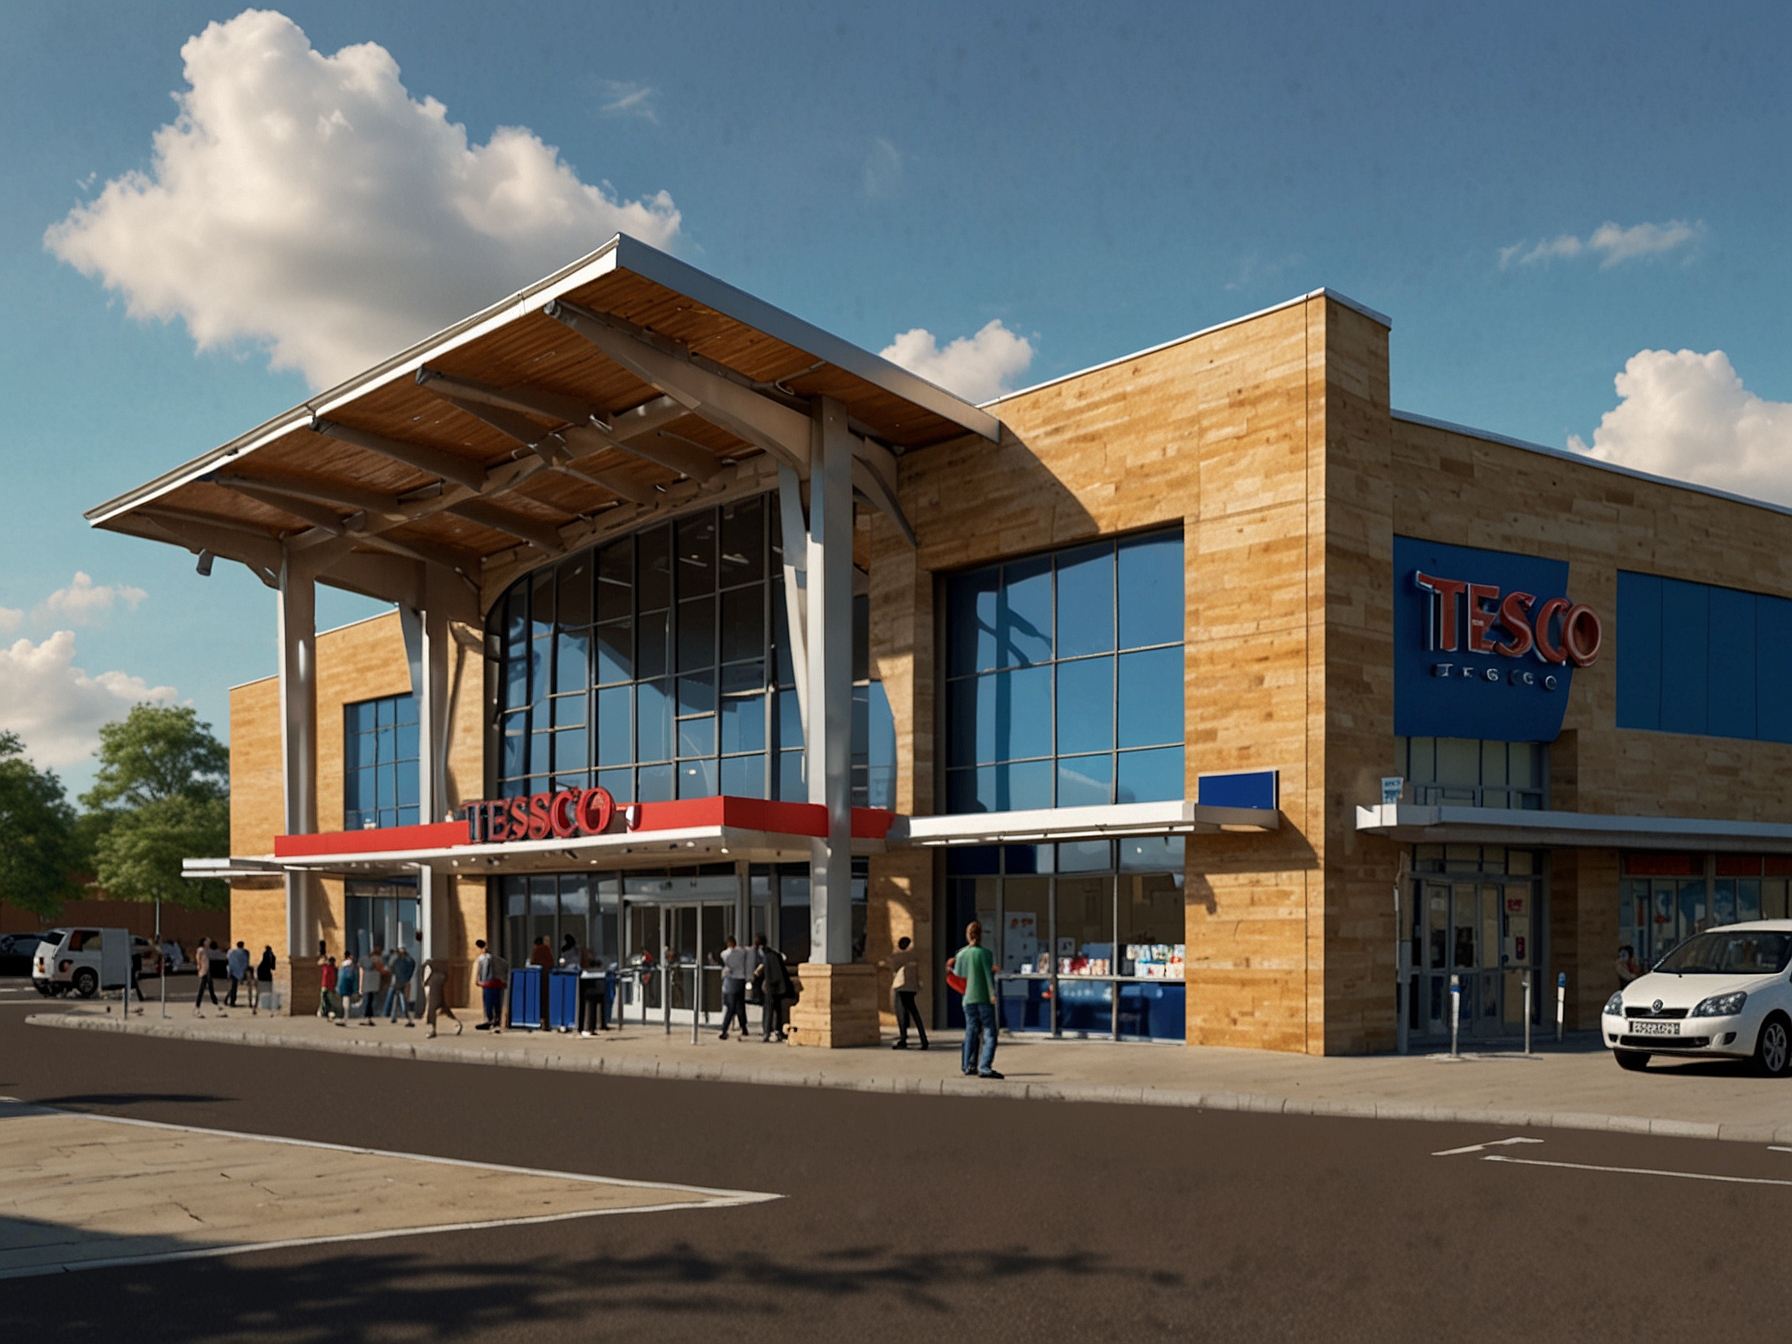 Tesco supermarket with prominent branding, emphasizing its strong market presence, e-commerce capabilities, and consumer loyalty program contributing to recent share price surge.